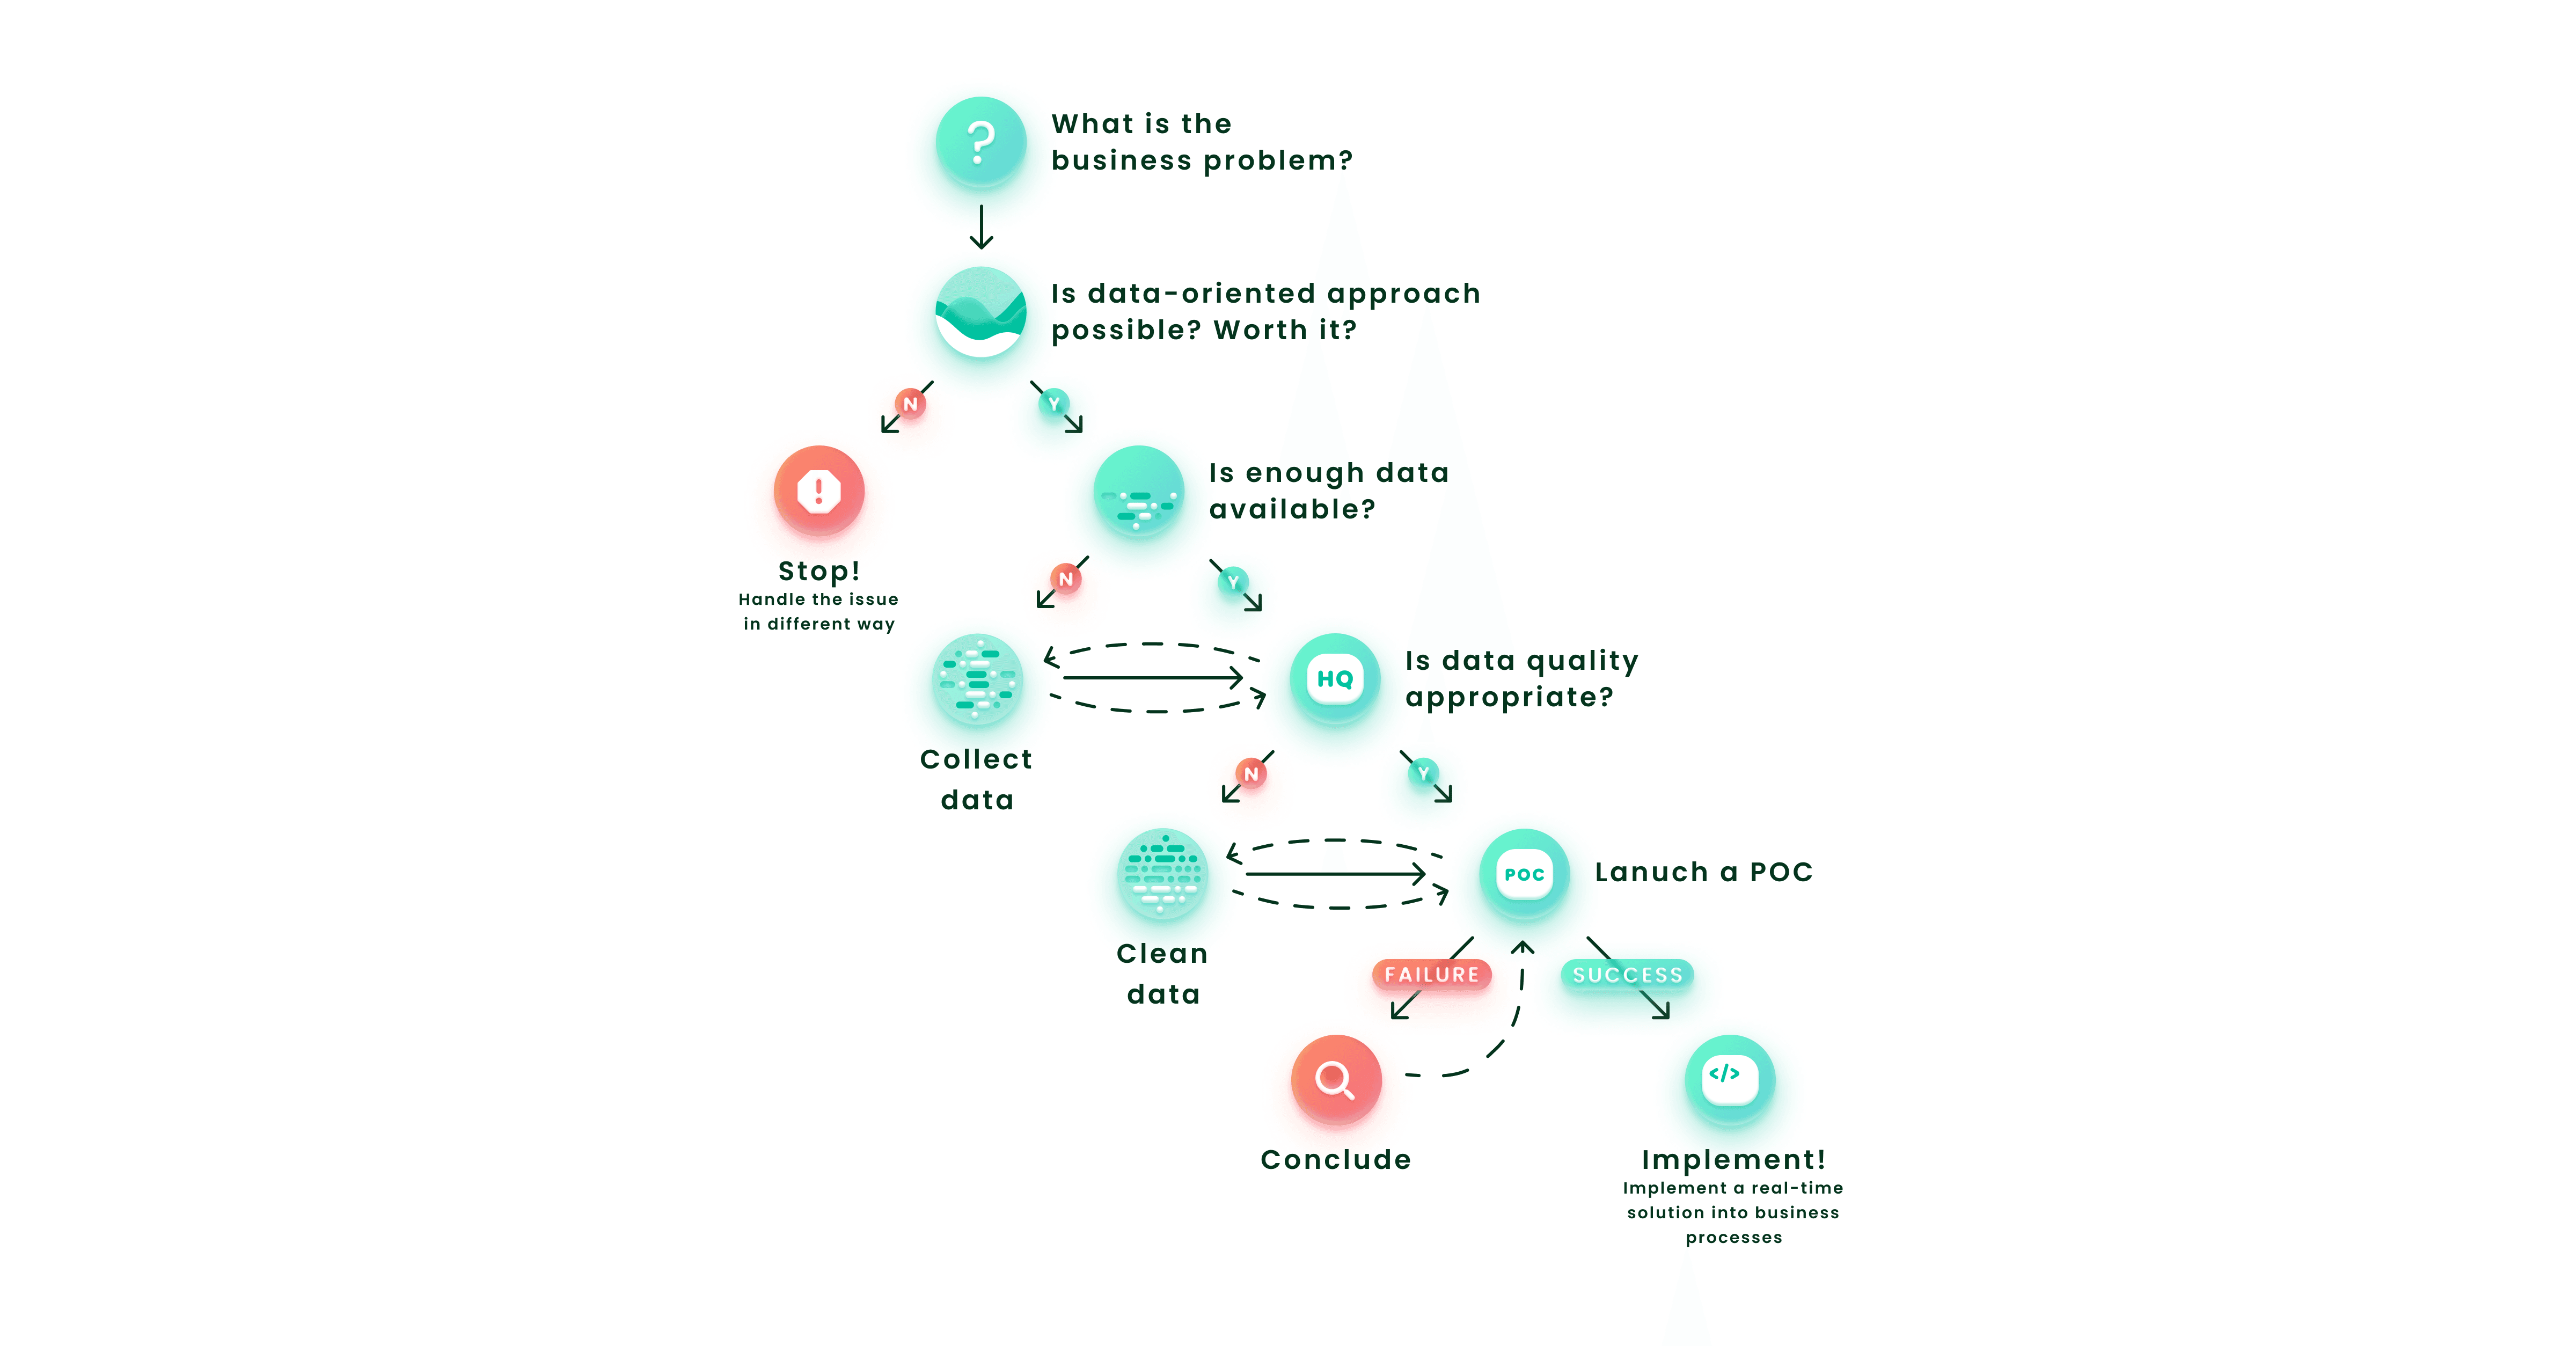 decision tree from the use case idea to day-to-day implementation